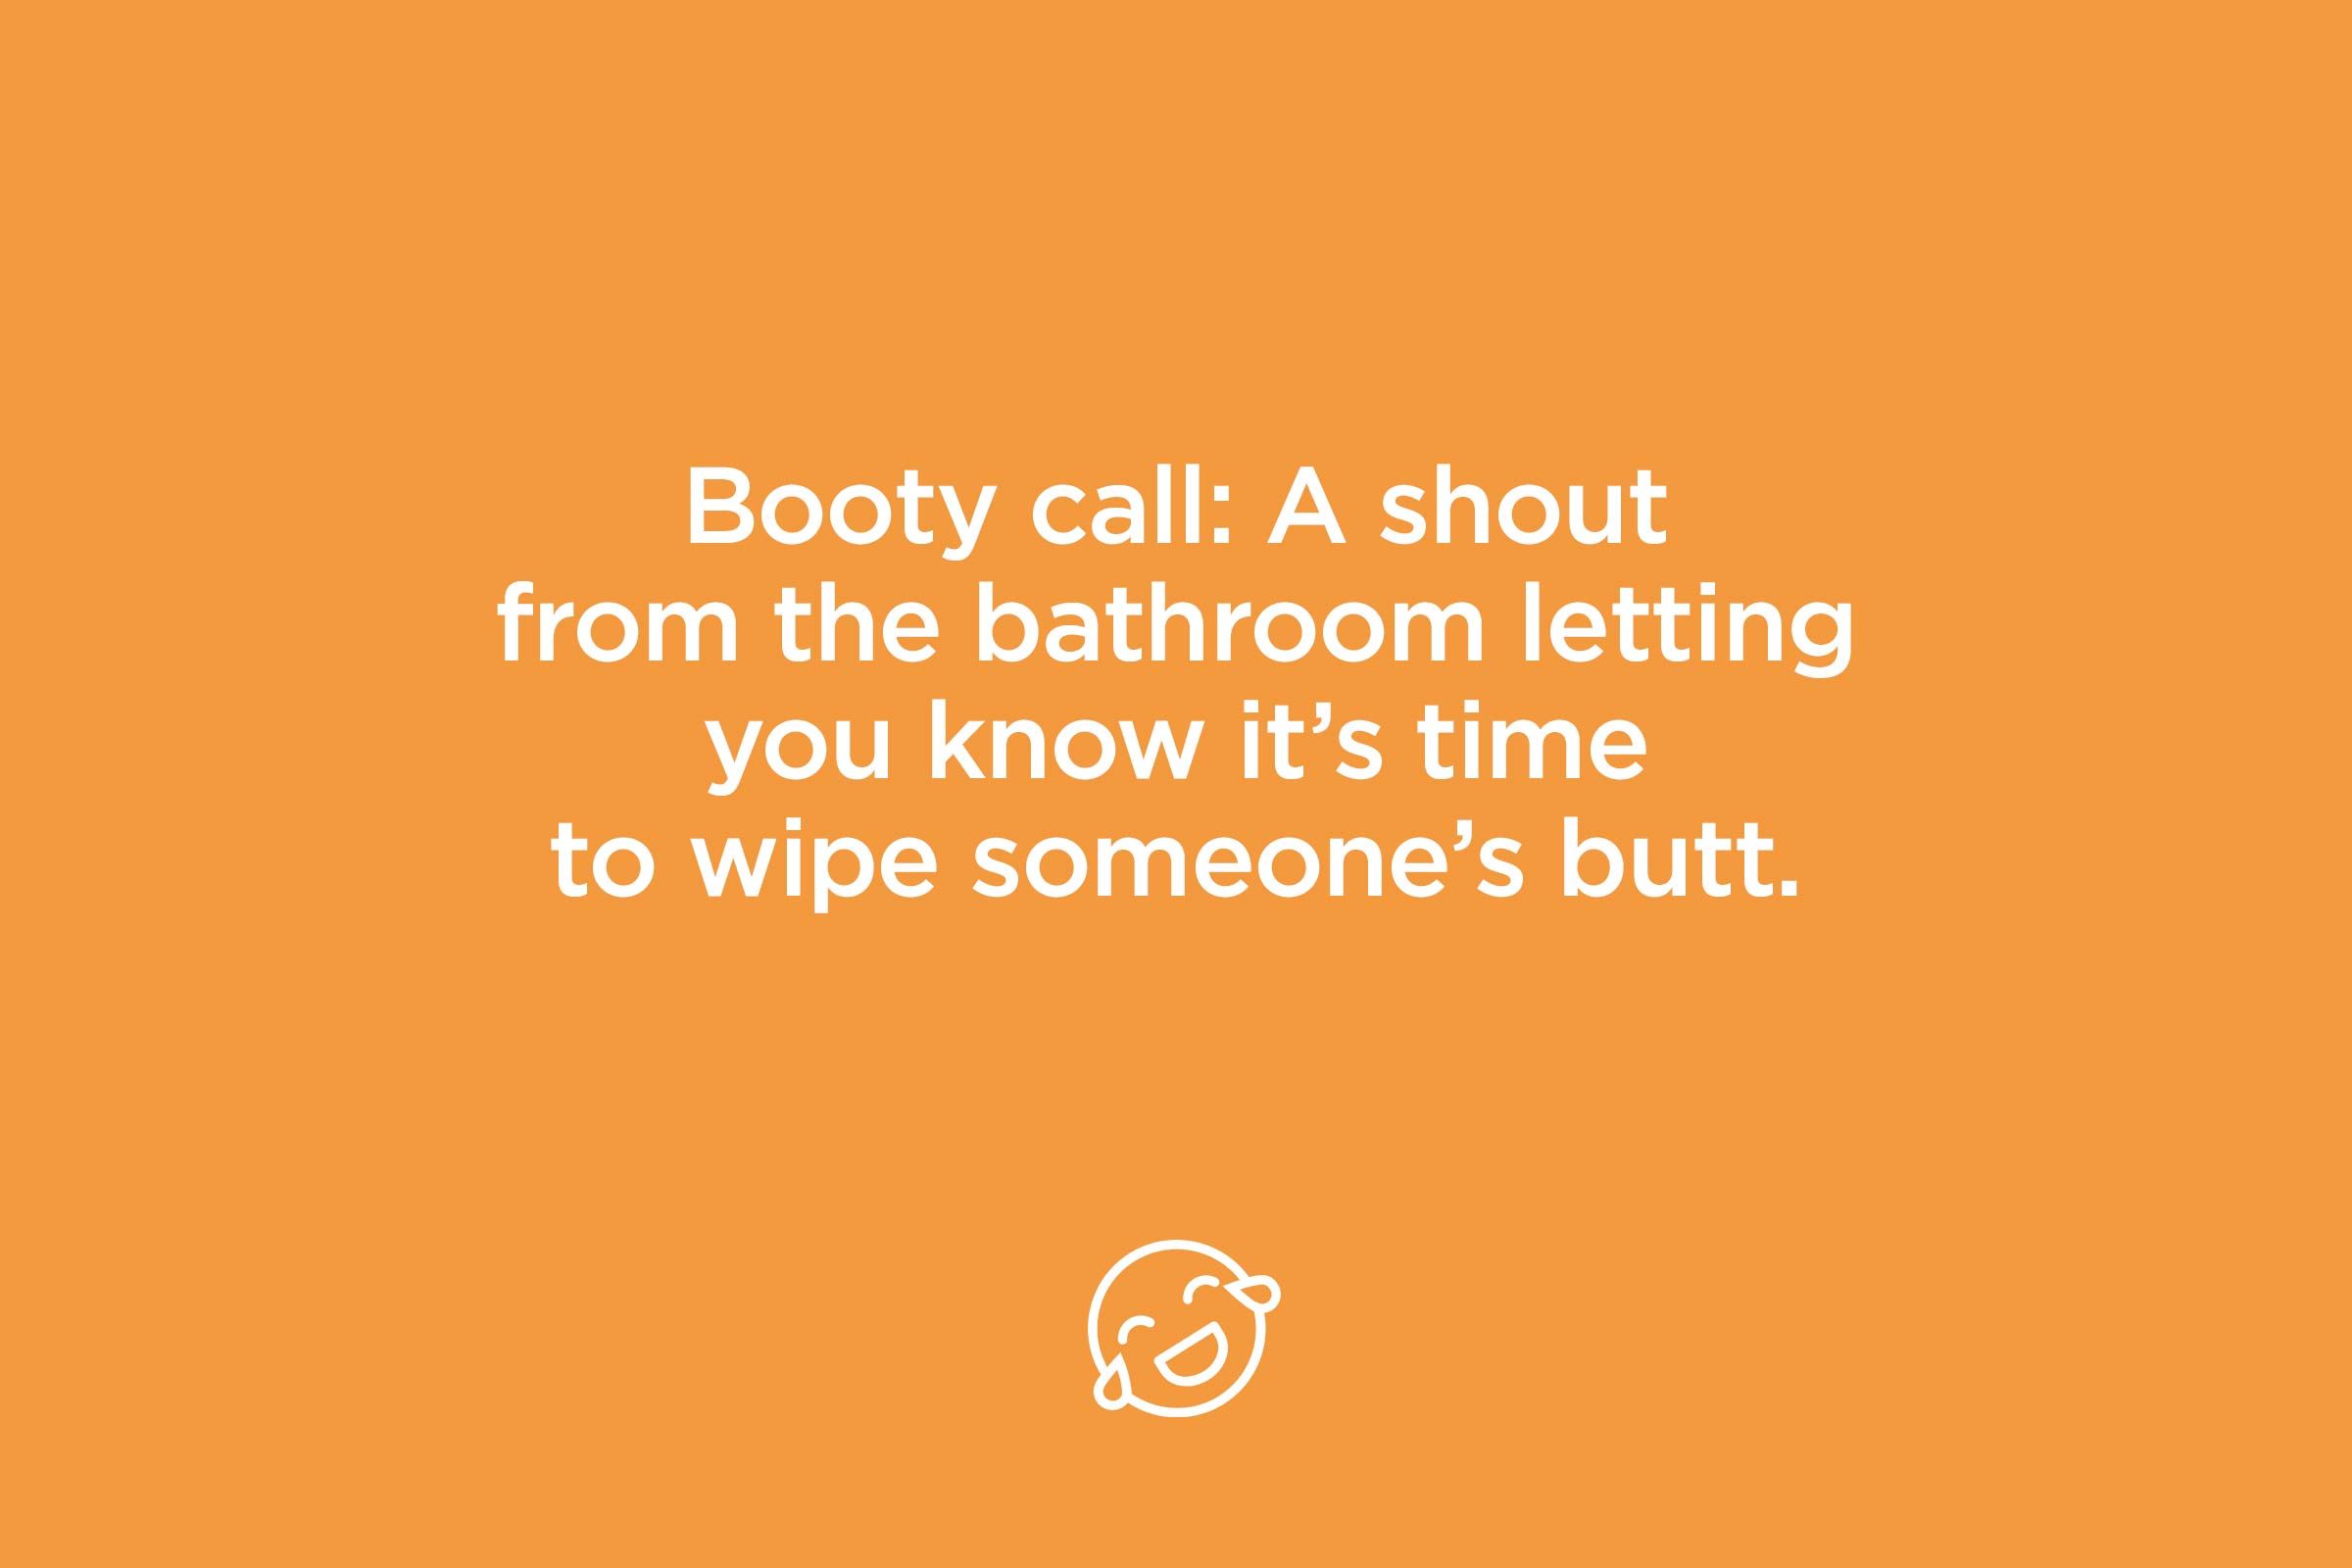 booty call: a shout from the bathroom